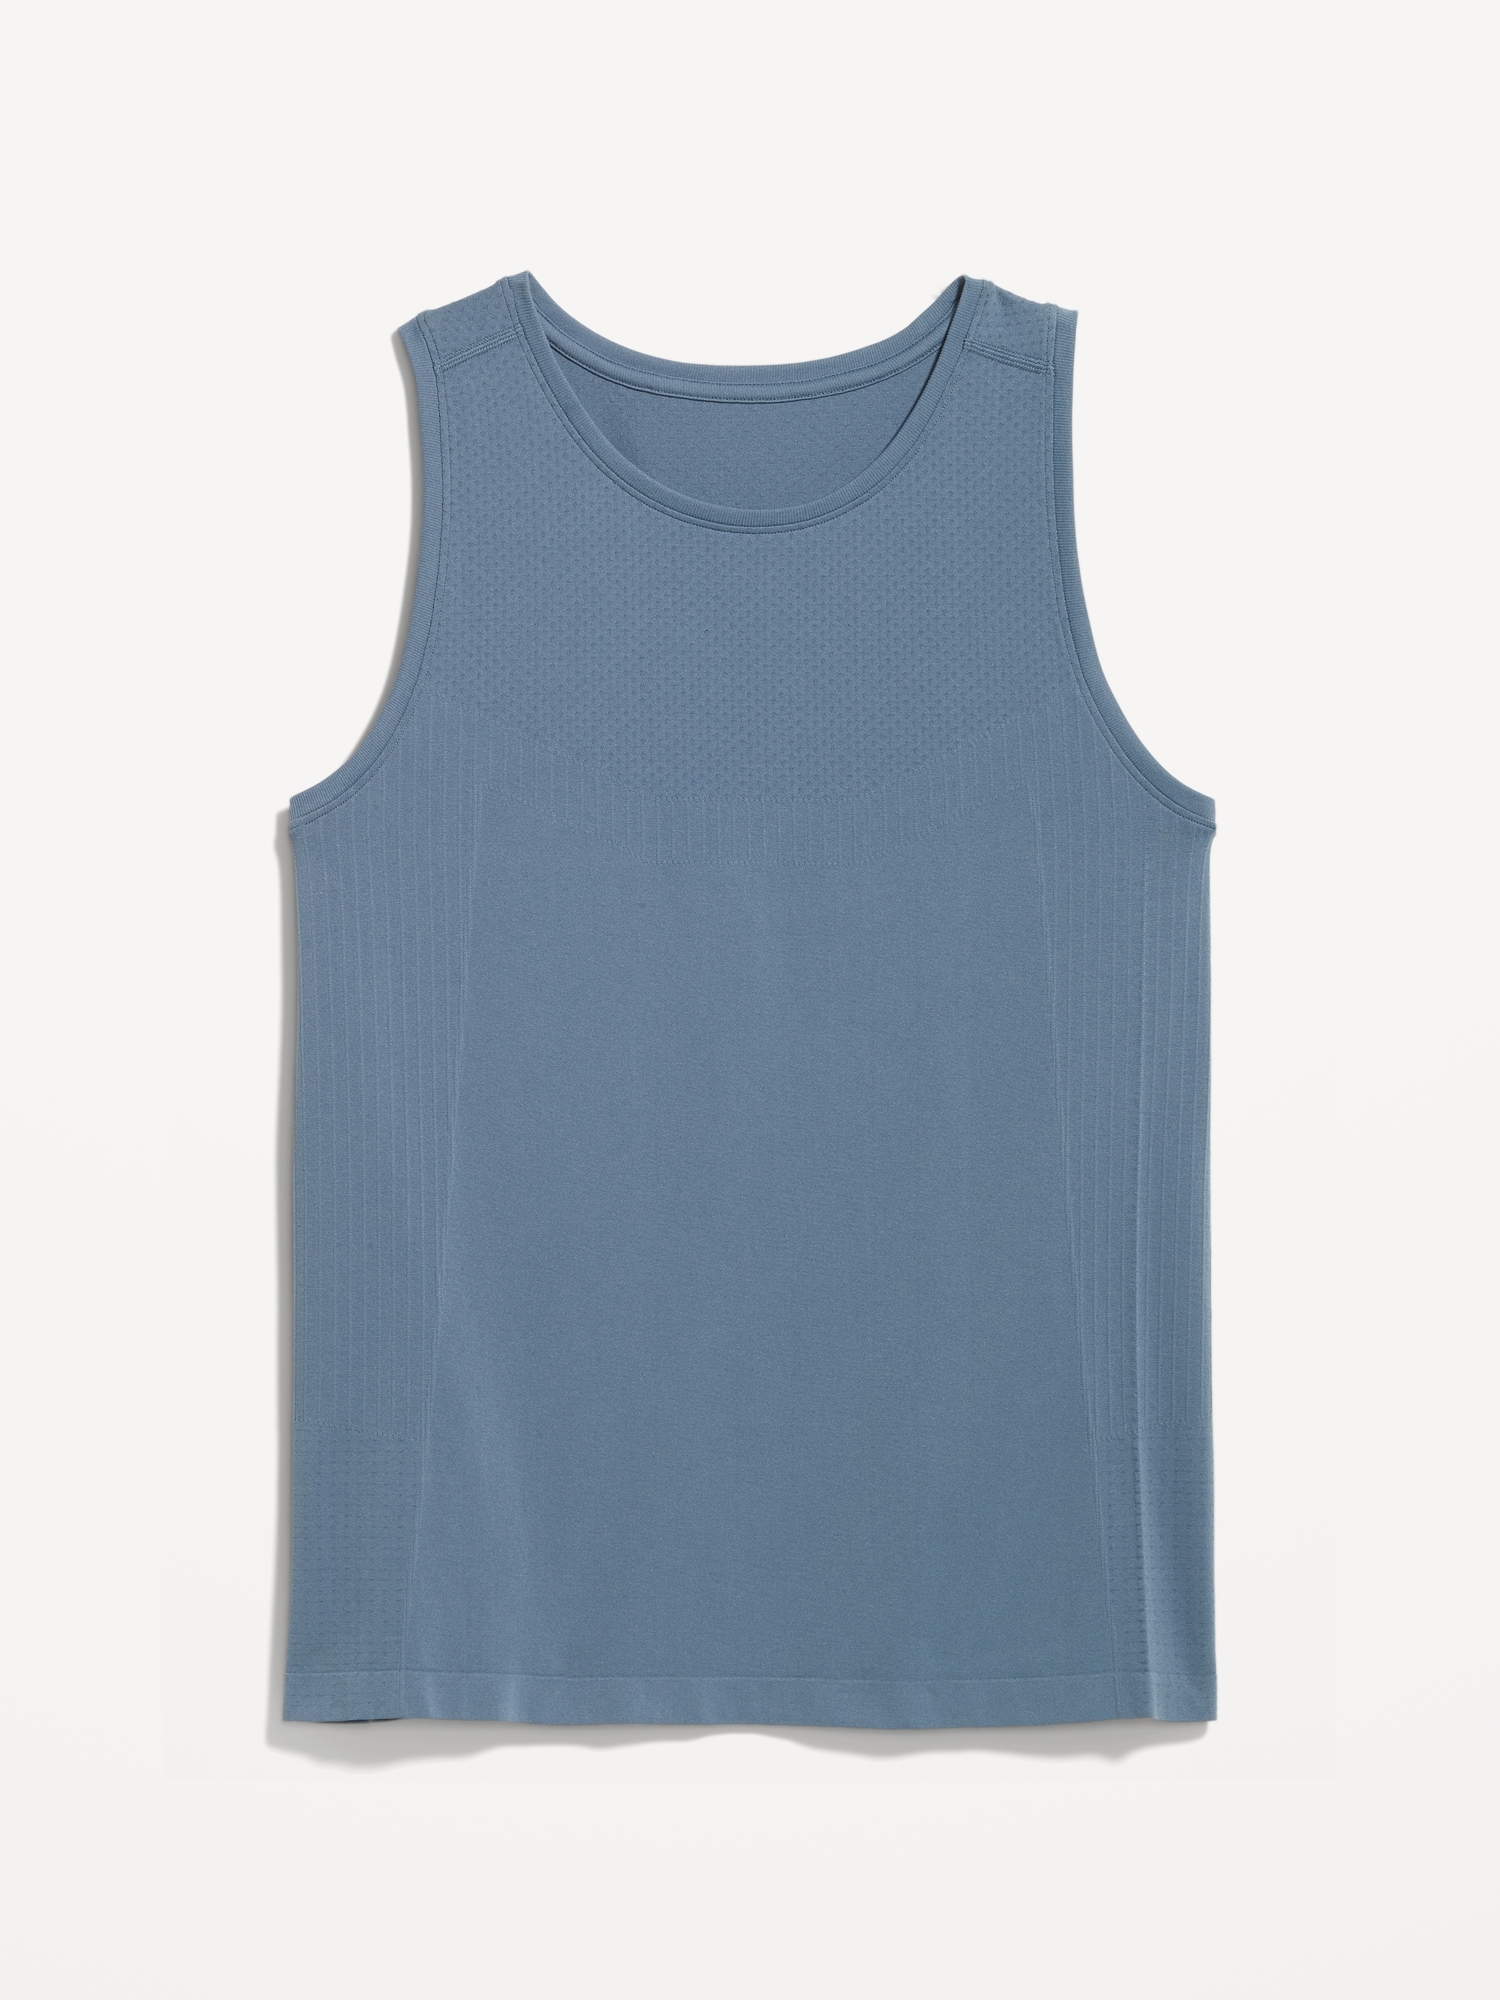 Go-Dry Cool Seamless Performance Tank Top